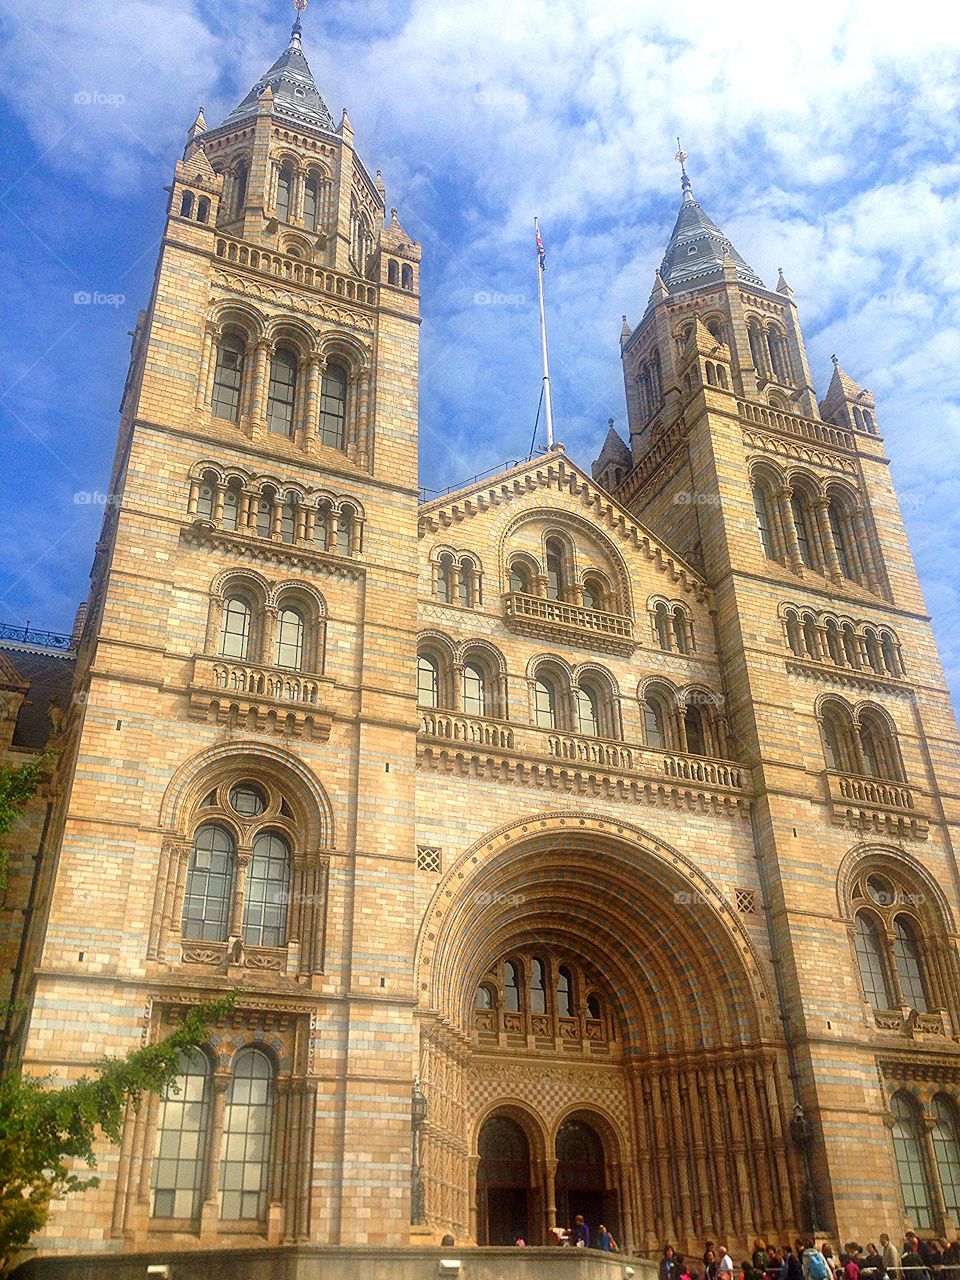 National history museum London 